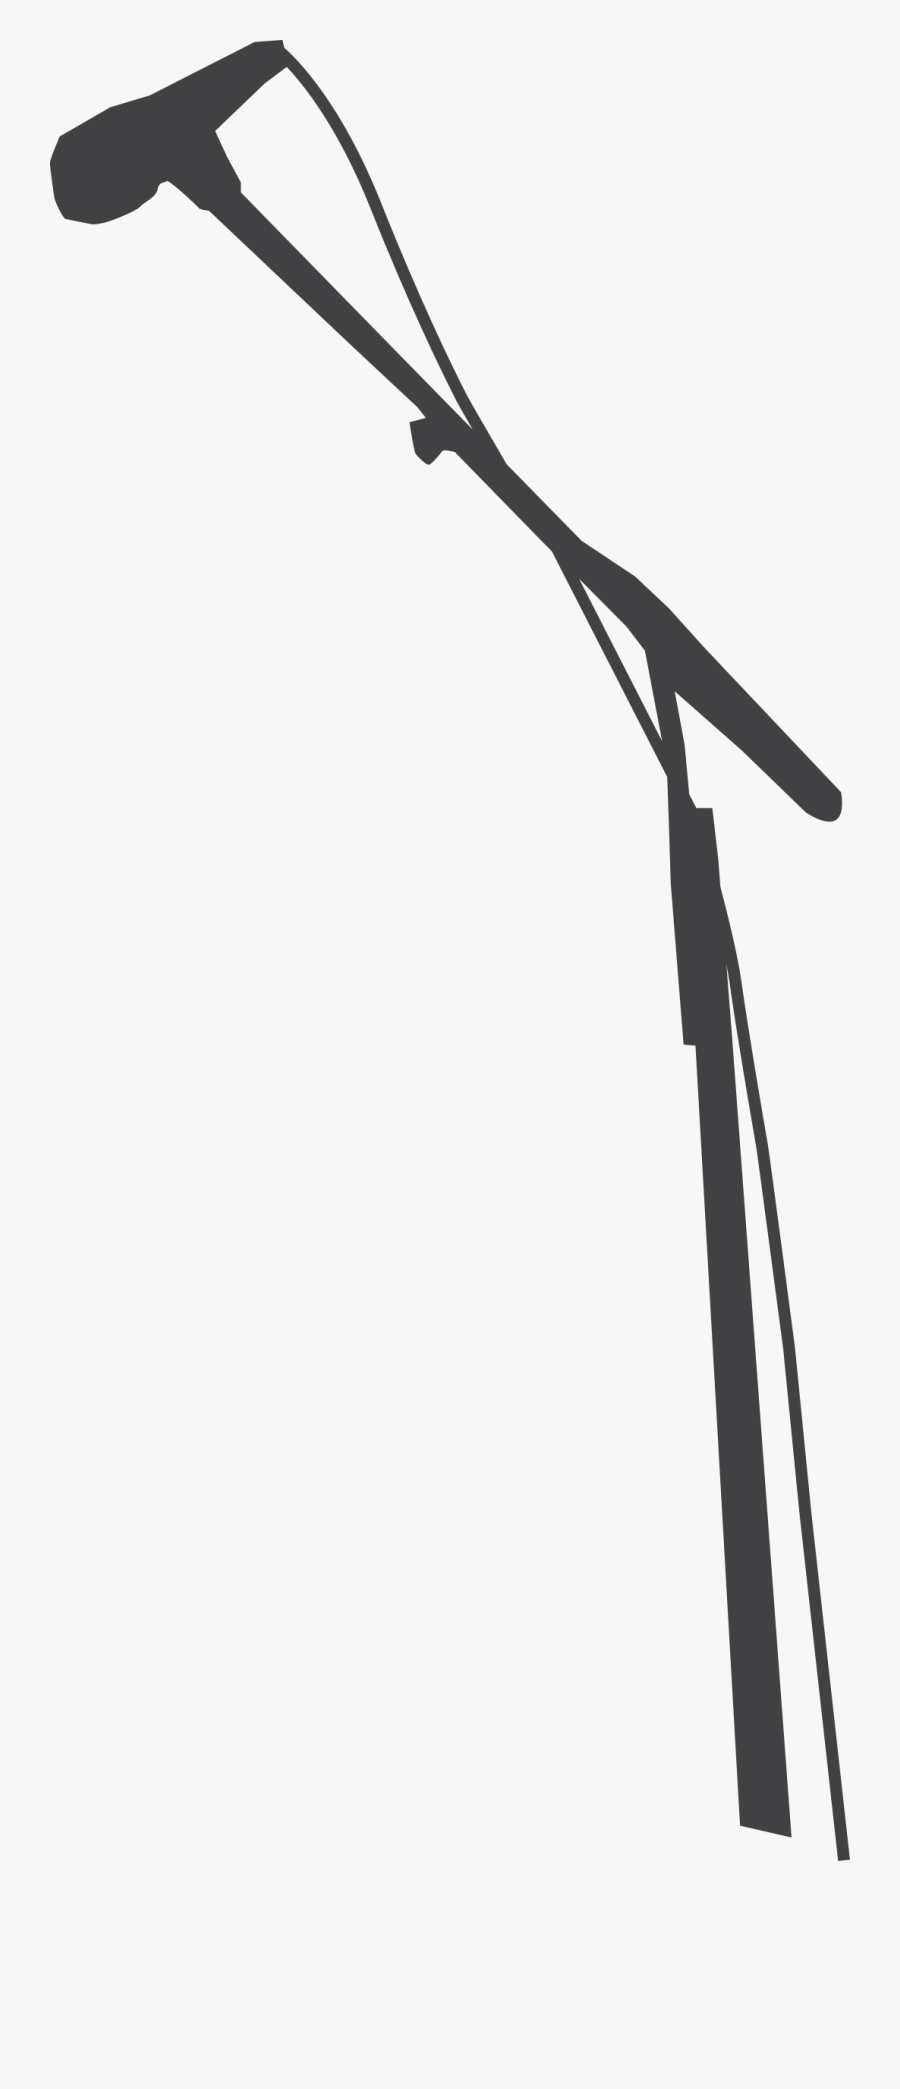 Microphone On Stand Png - Microphone Stand Silhouette Png, Transparent Clipart